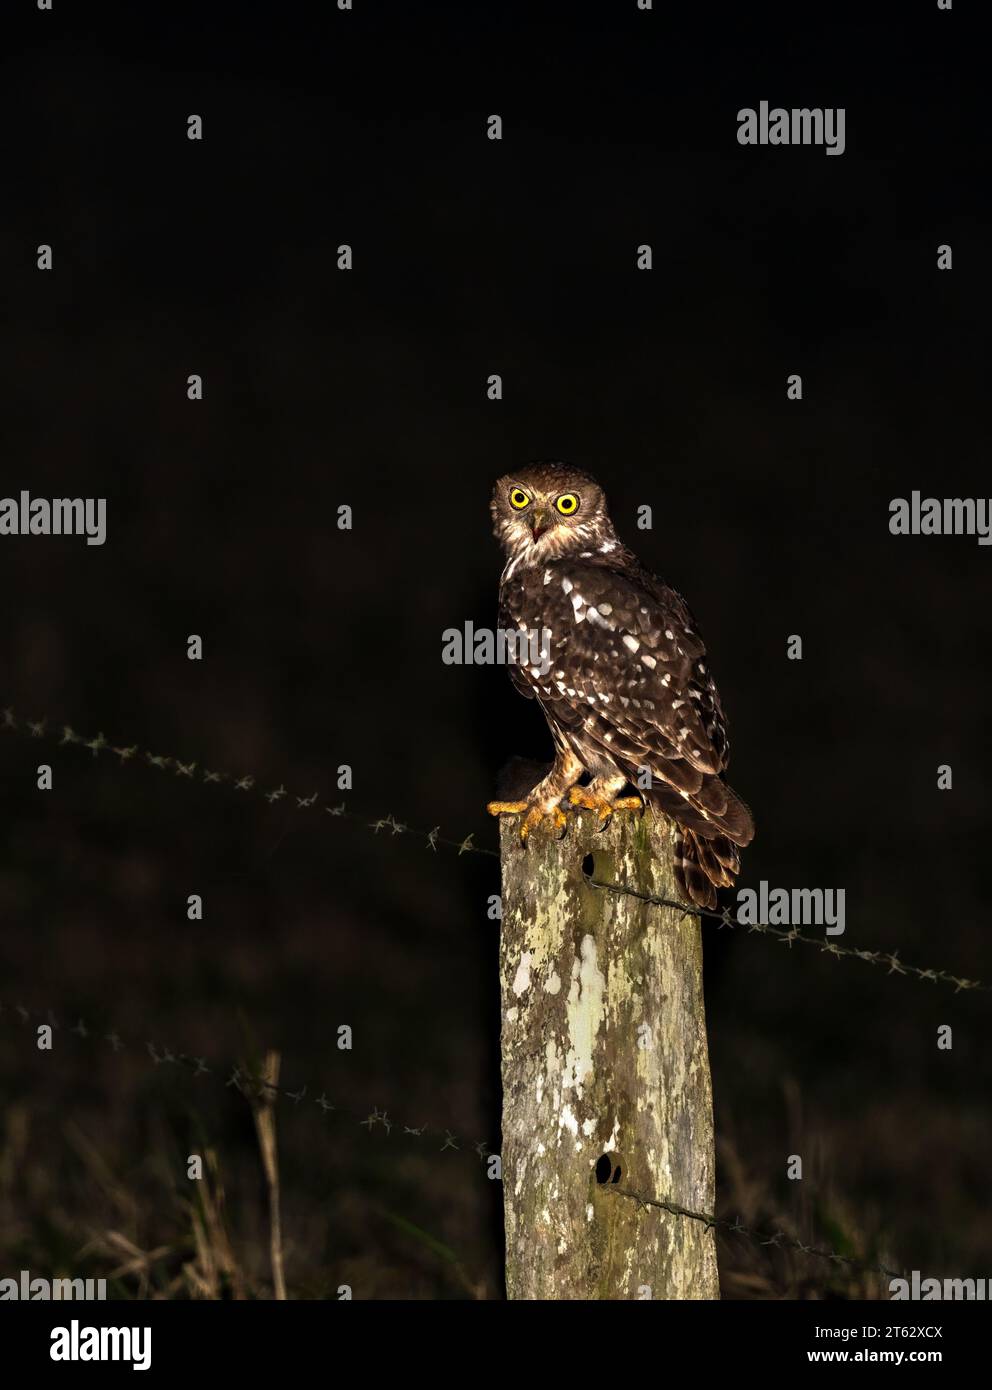 Barking owl (Ninox connivens), in the wild sitting on a fence post, nocturnal bird with bright yellow eyes native to mainland Australia. Stock Photo